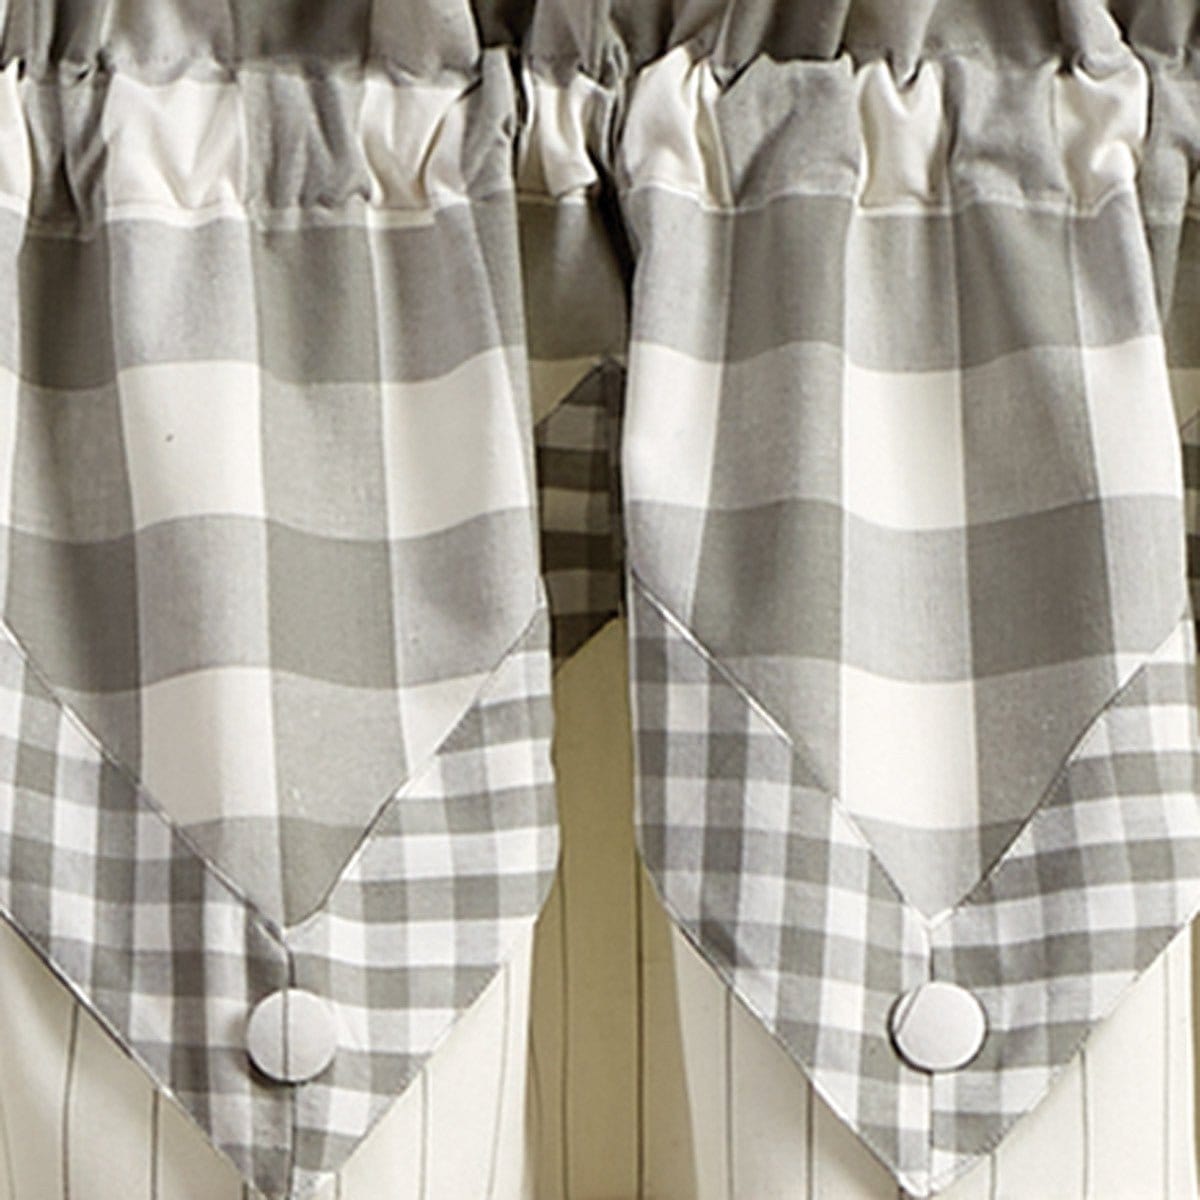 Wicklow Check in Dove Gray Point Valance Lined-Park Designs-The Village Merchant